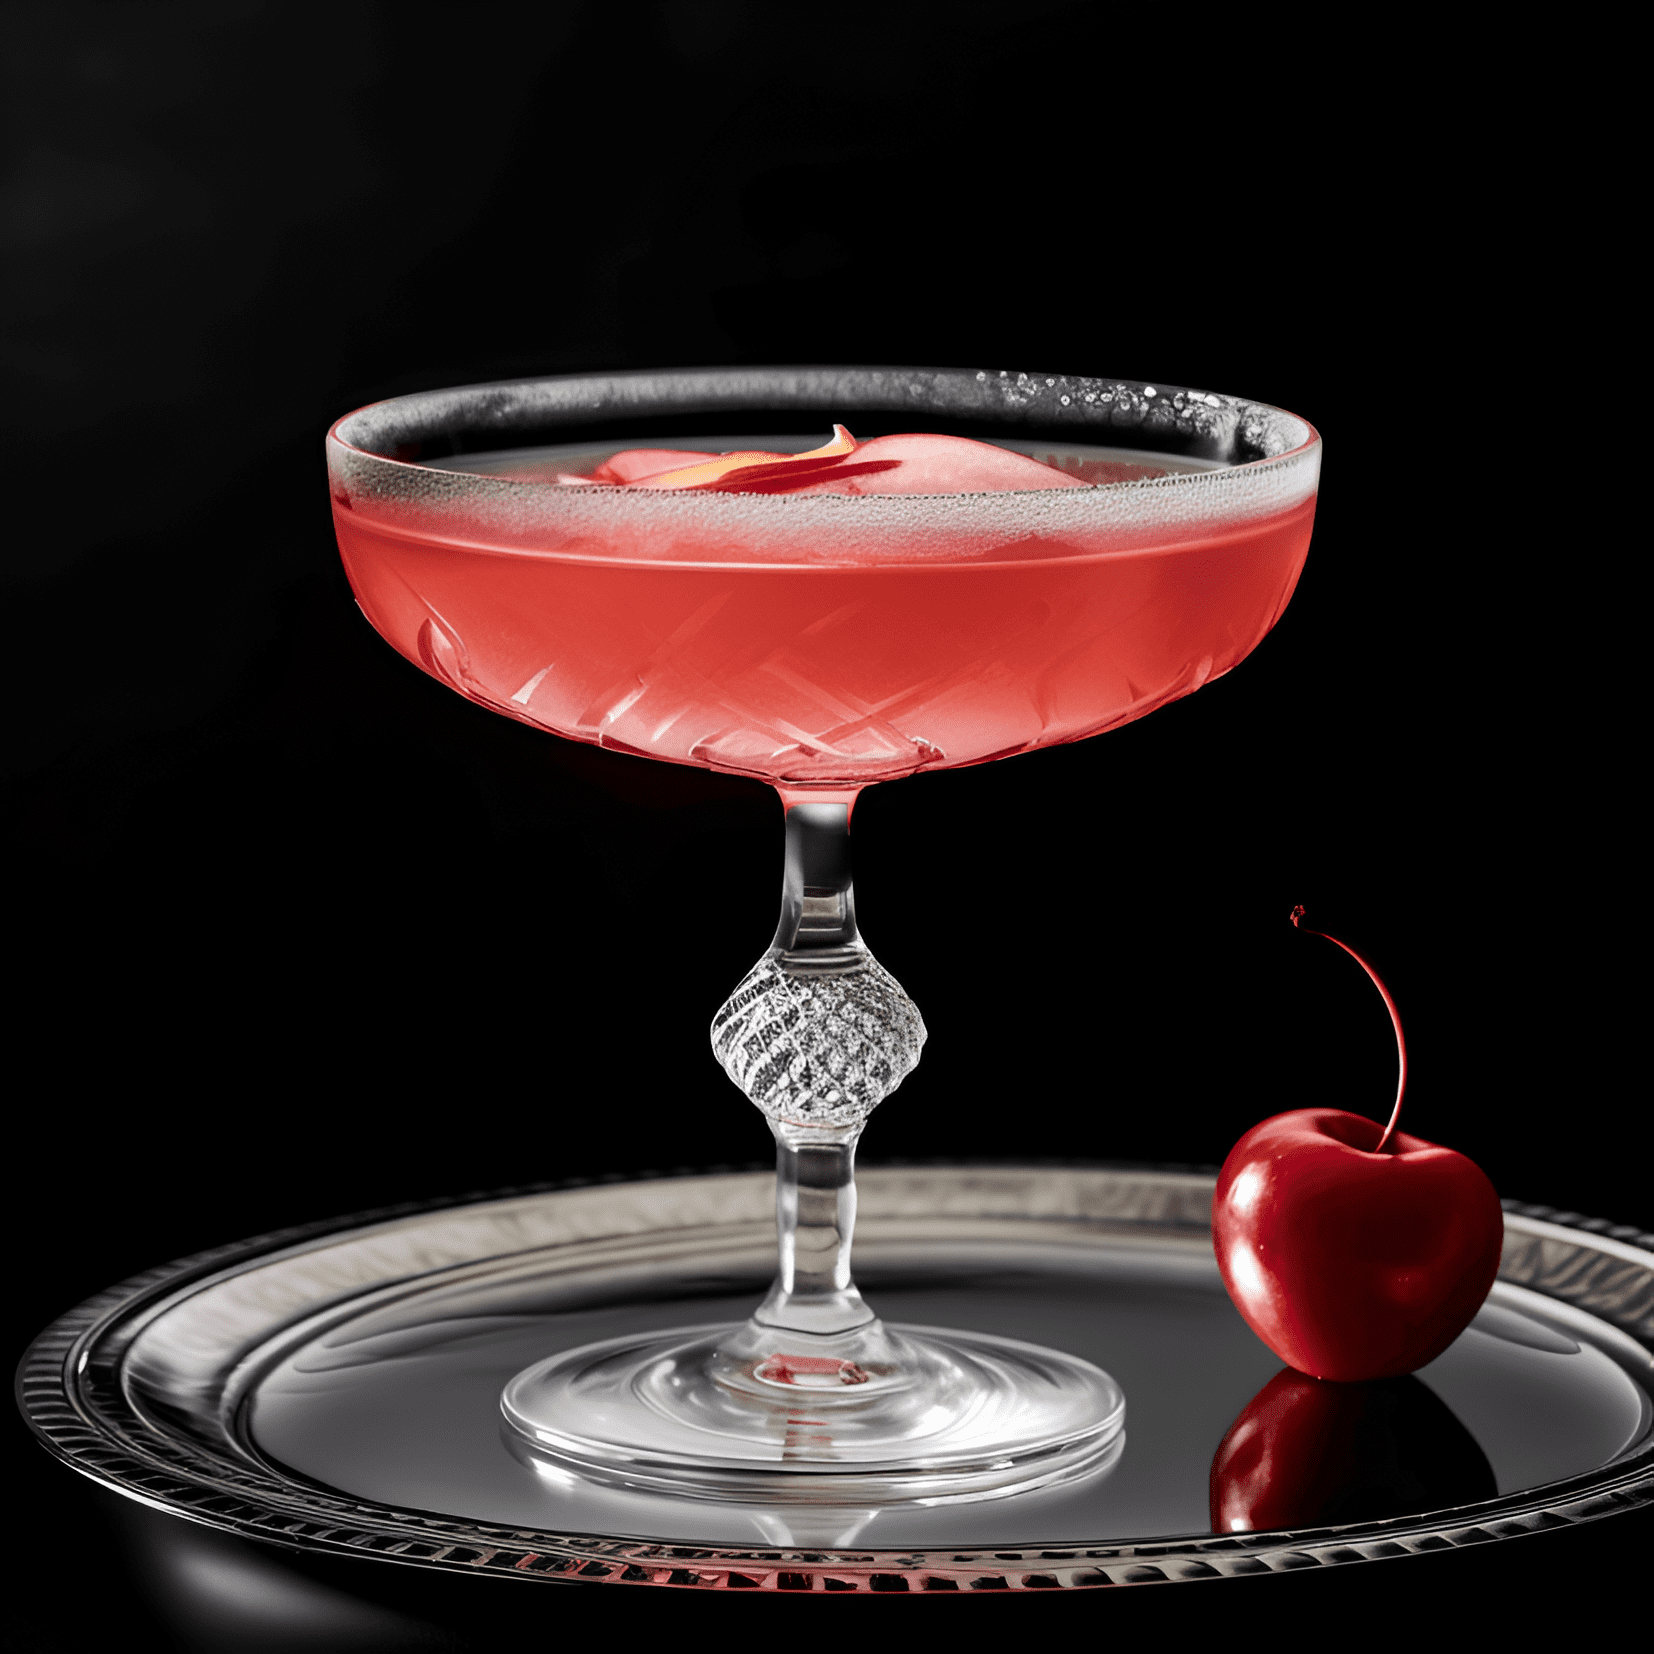 Jack Rose Cocktail Recipe - The Jack Rose cocktail is a delightful combination of sweet, sour, and fruity flavors. The apple brandy provides a rich, smooth base, while the lemon juice adds a refreshing tanginess. The grenadine imparts a subtle sweetness and a beautiful rosy hue.